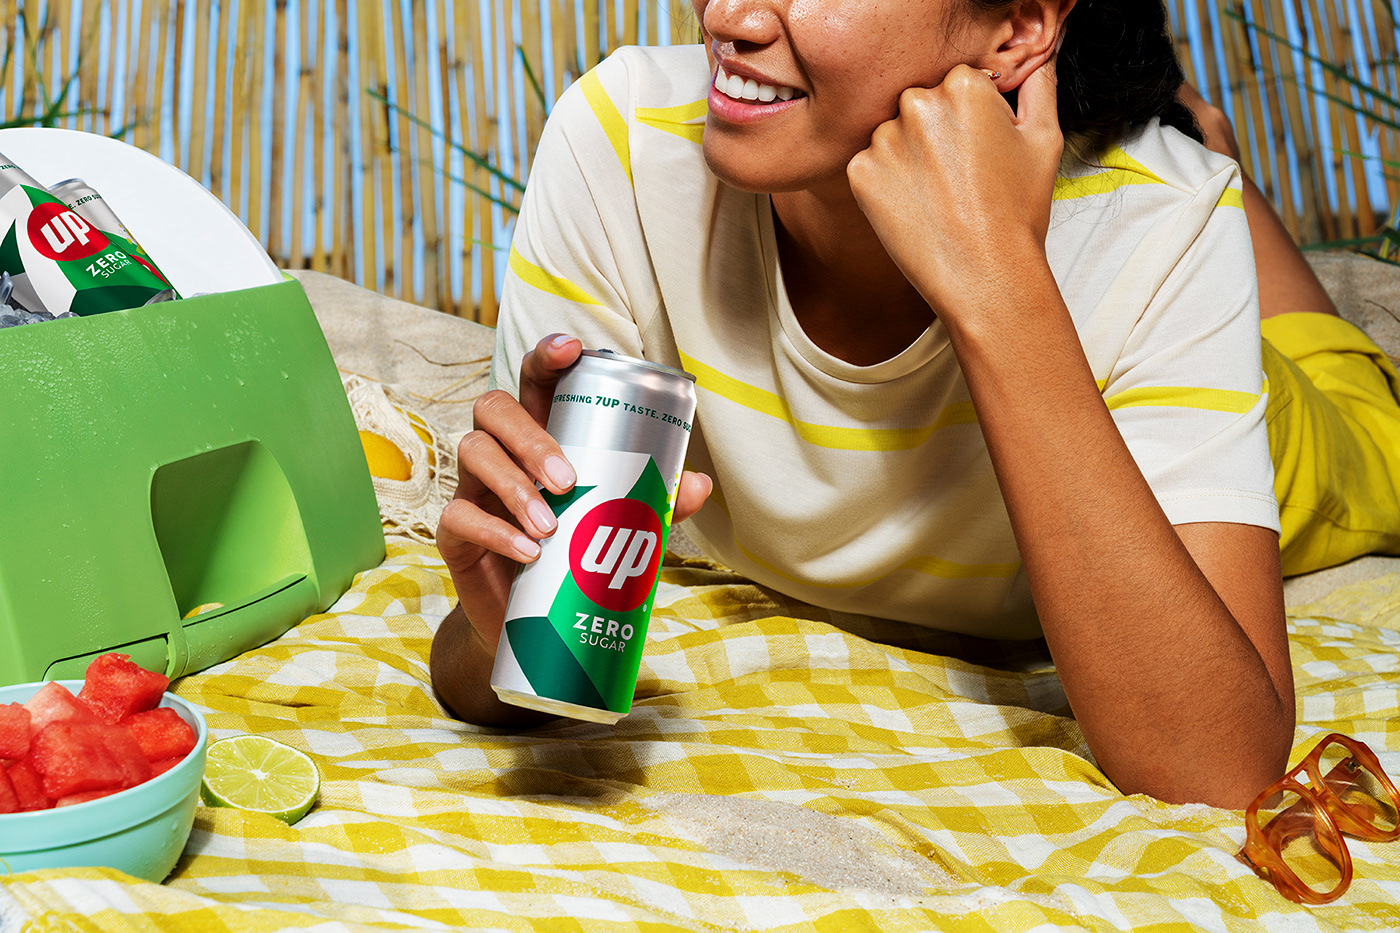 7Up food photography photographer Beverage photography Photography  7Up Campaign  advertsing campaign Drink Photographer